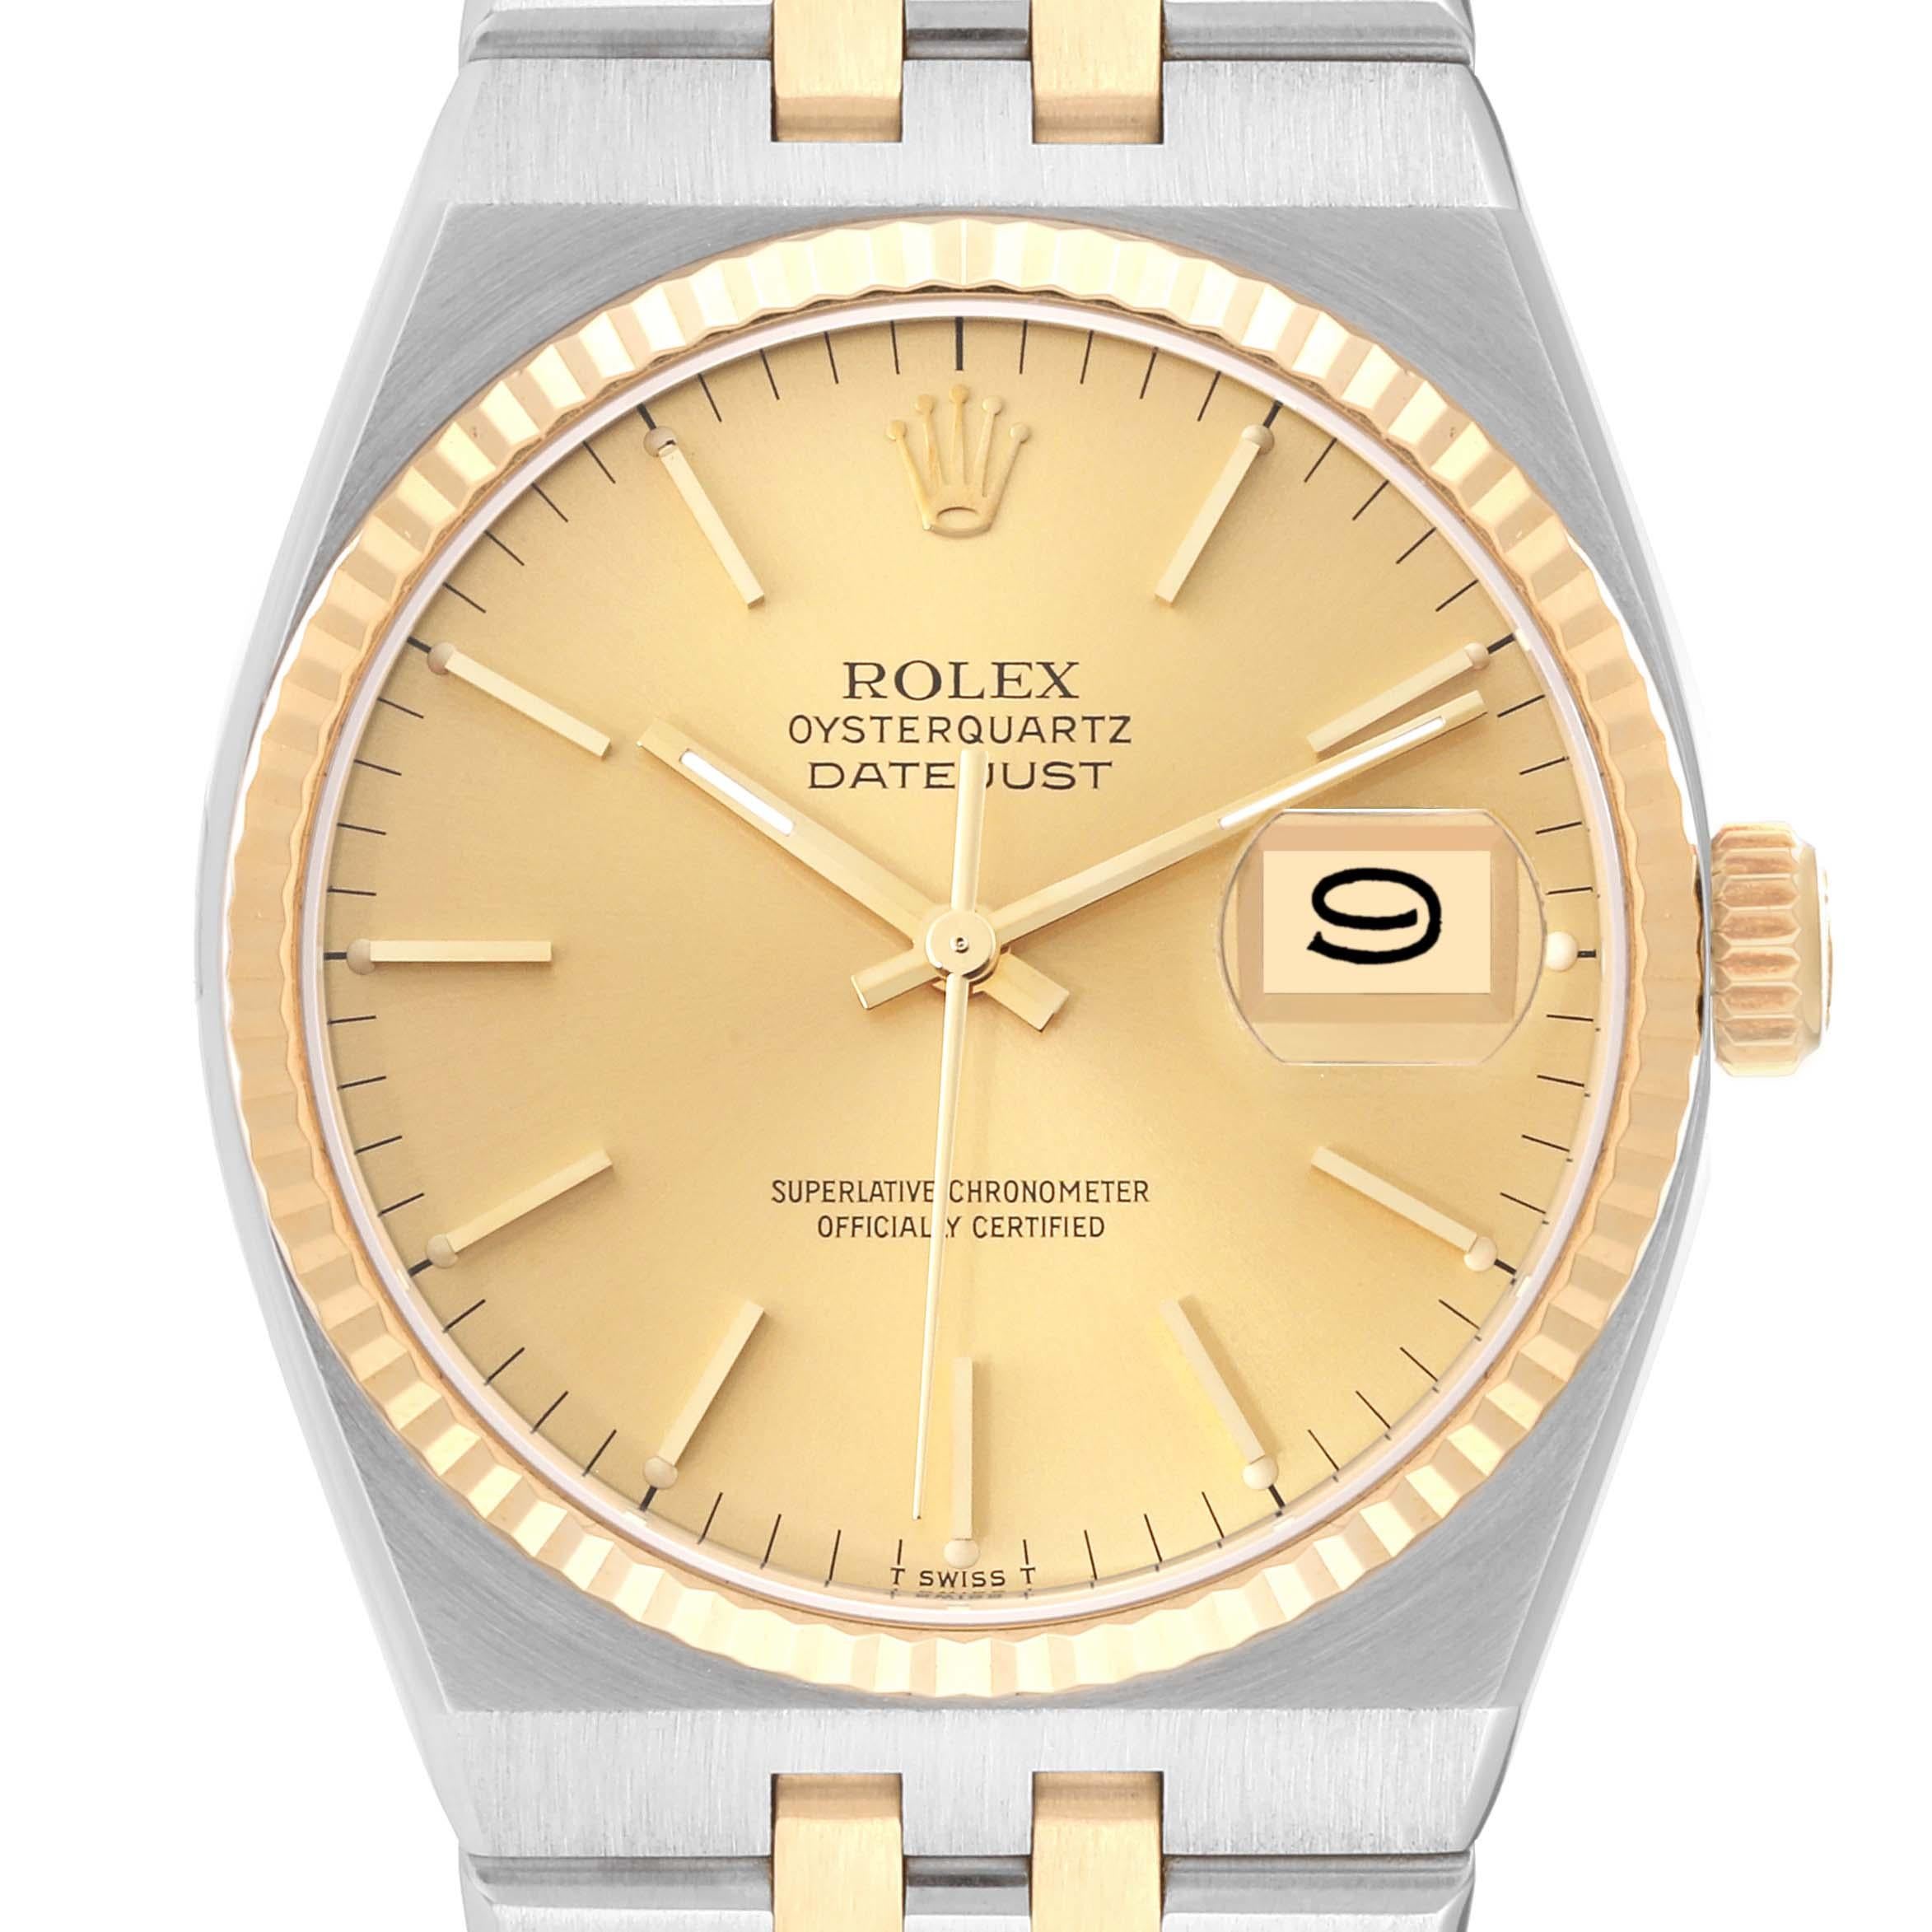 Rolex Oysterquartz Datejust Steel Yellow Gold Mens Watch 17013 Box Papers. Quartz movement. Stainless steel oyster case 36 mm in diameter. Rolex logo on the crown. 18k yellow gold fluted bezel. Scratch resistant sapphire crystal with cyclops